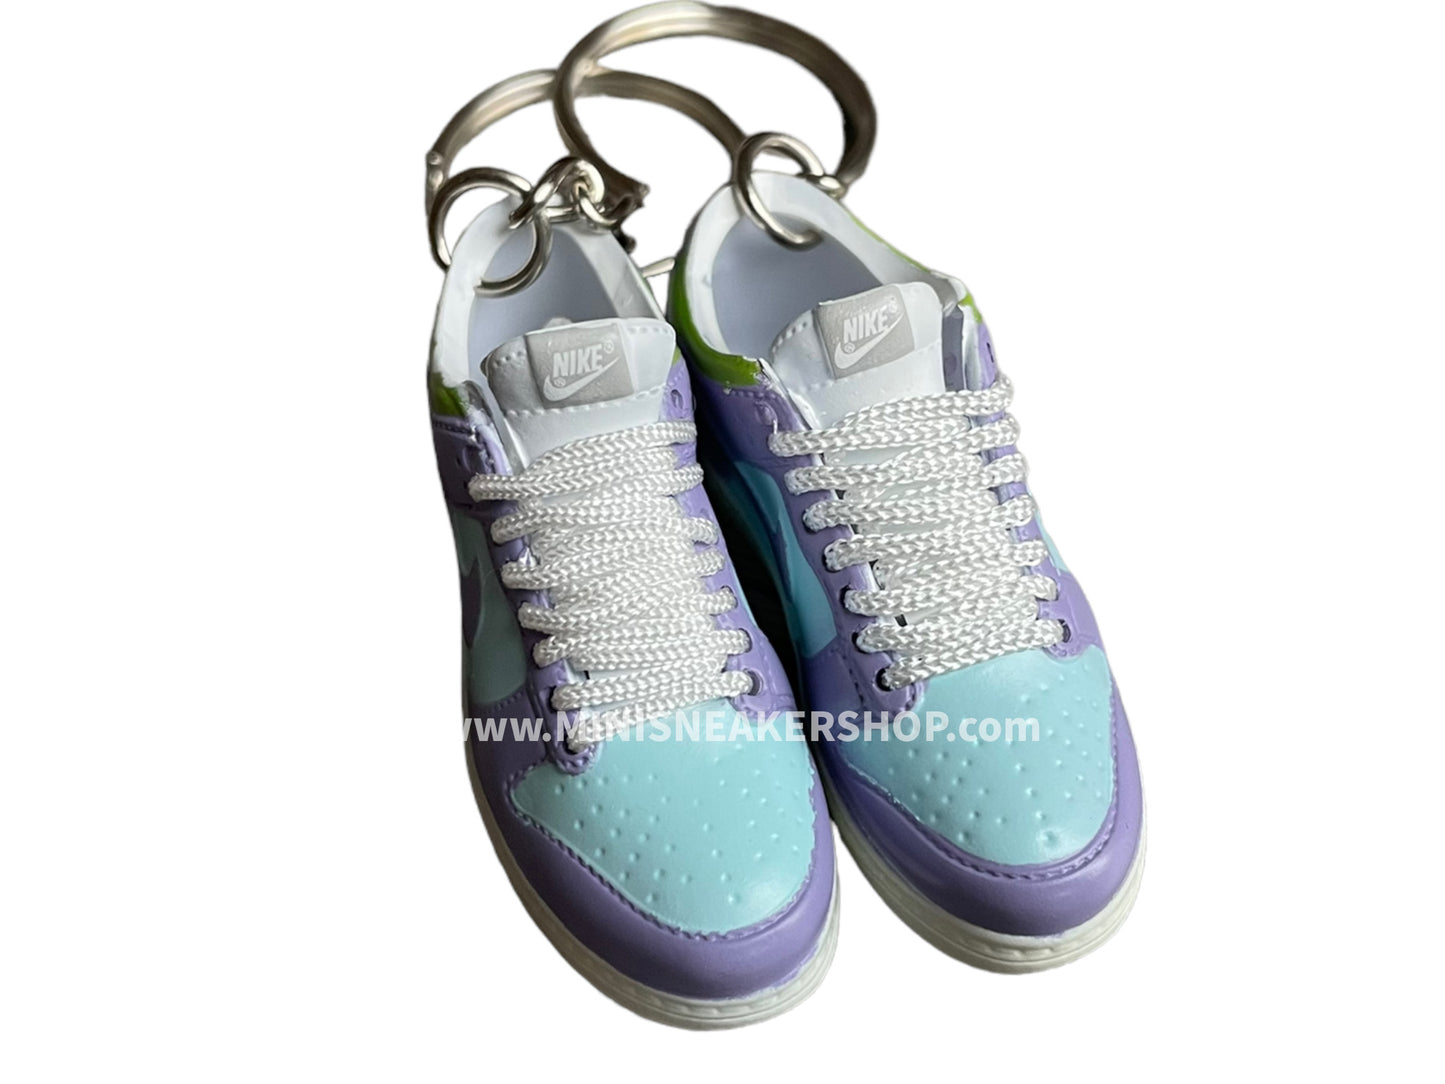 Mini sneaker keychain 3D Dunk - To the rescue